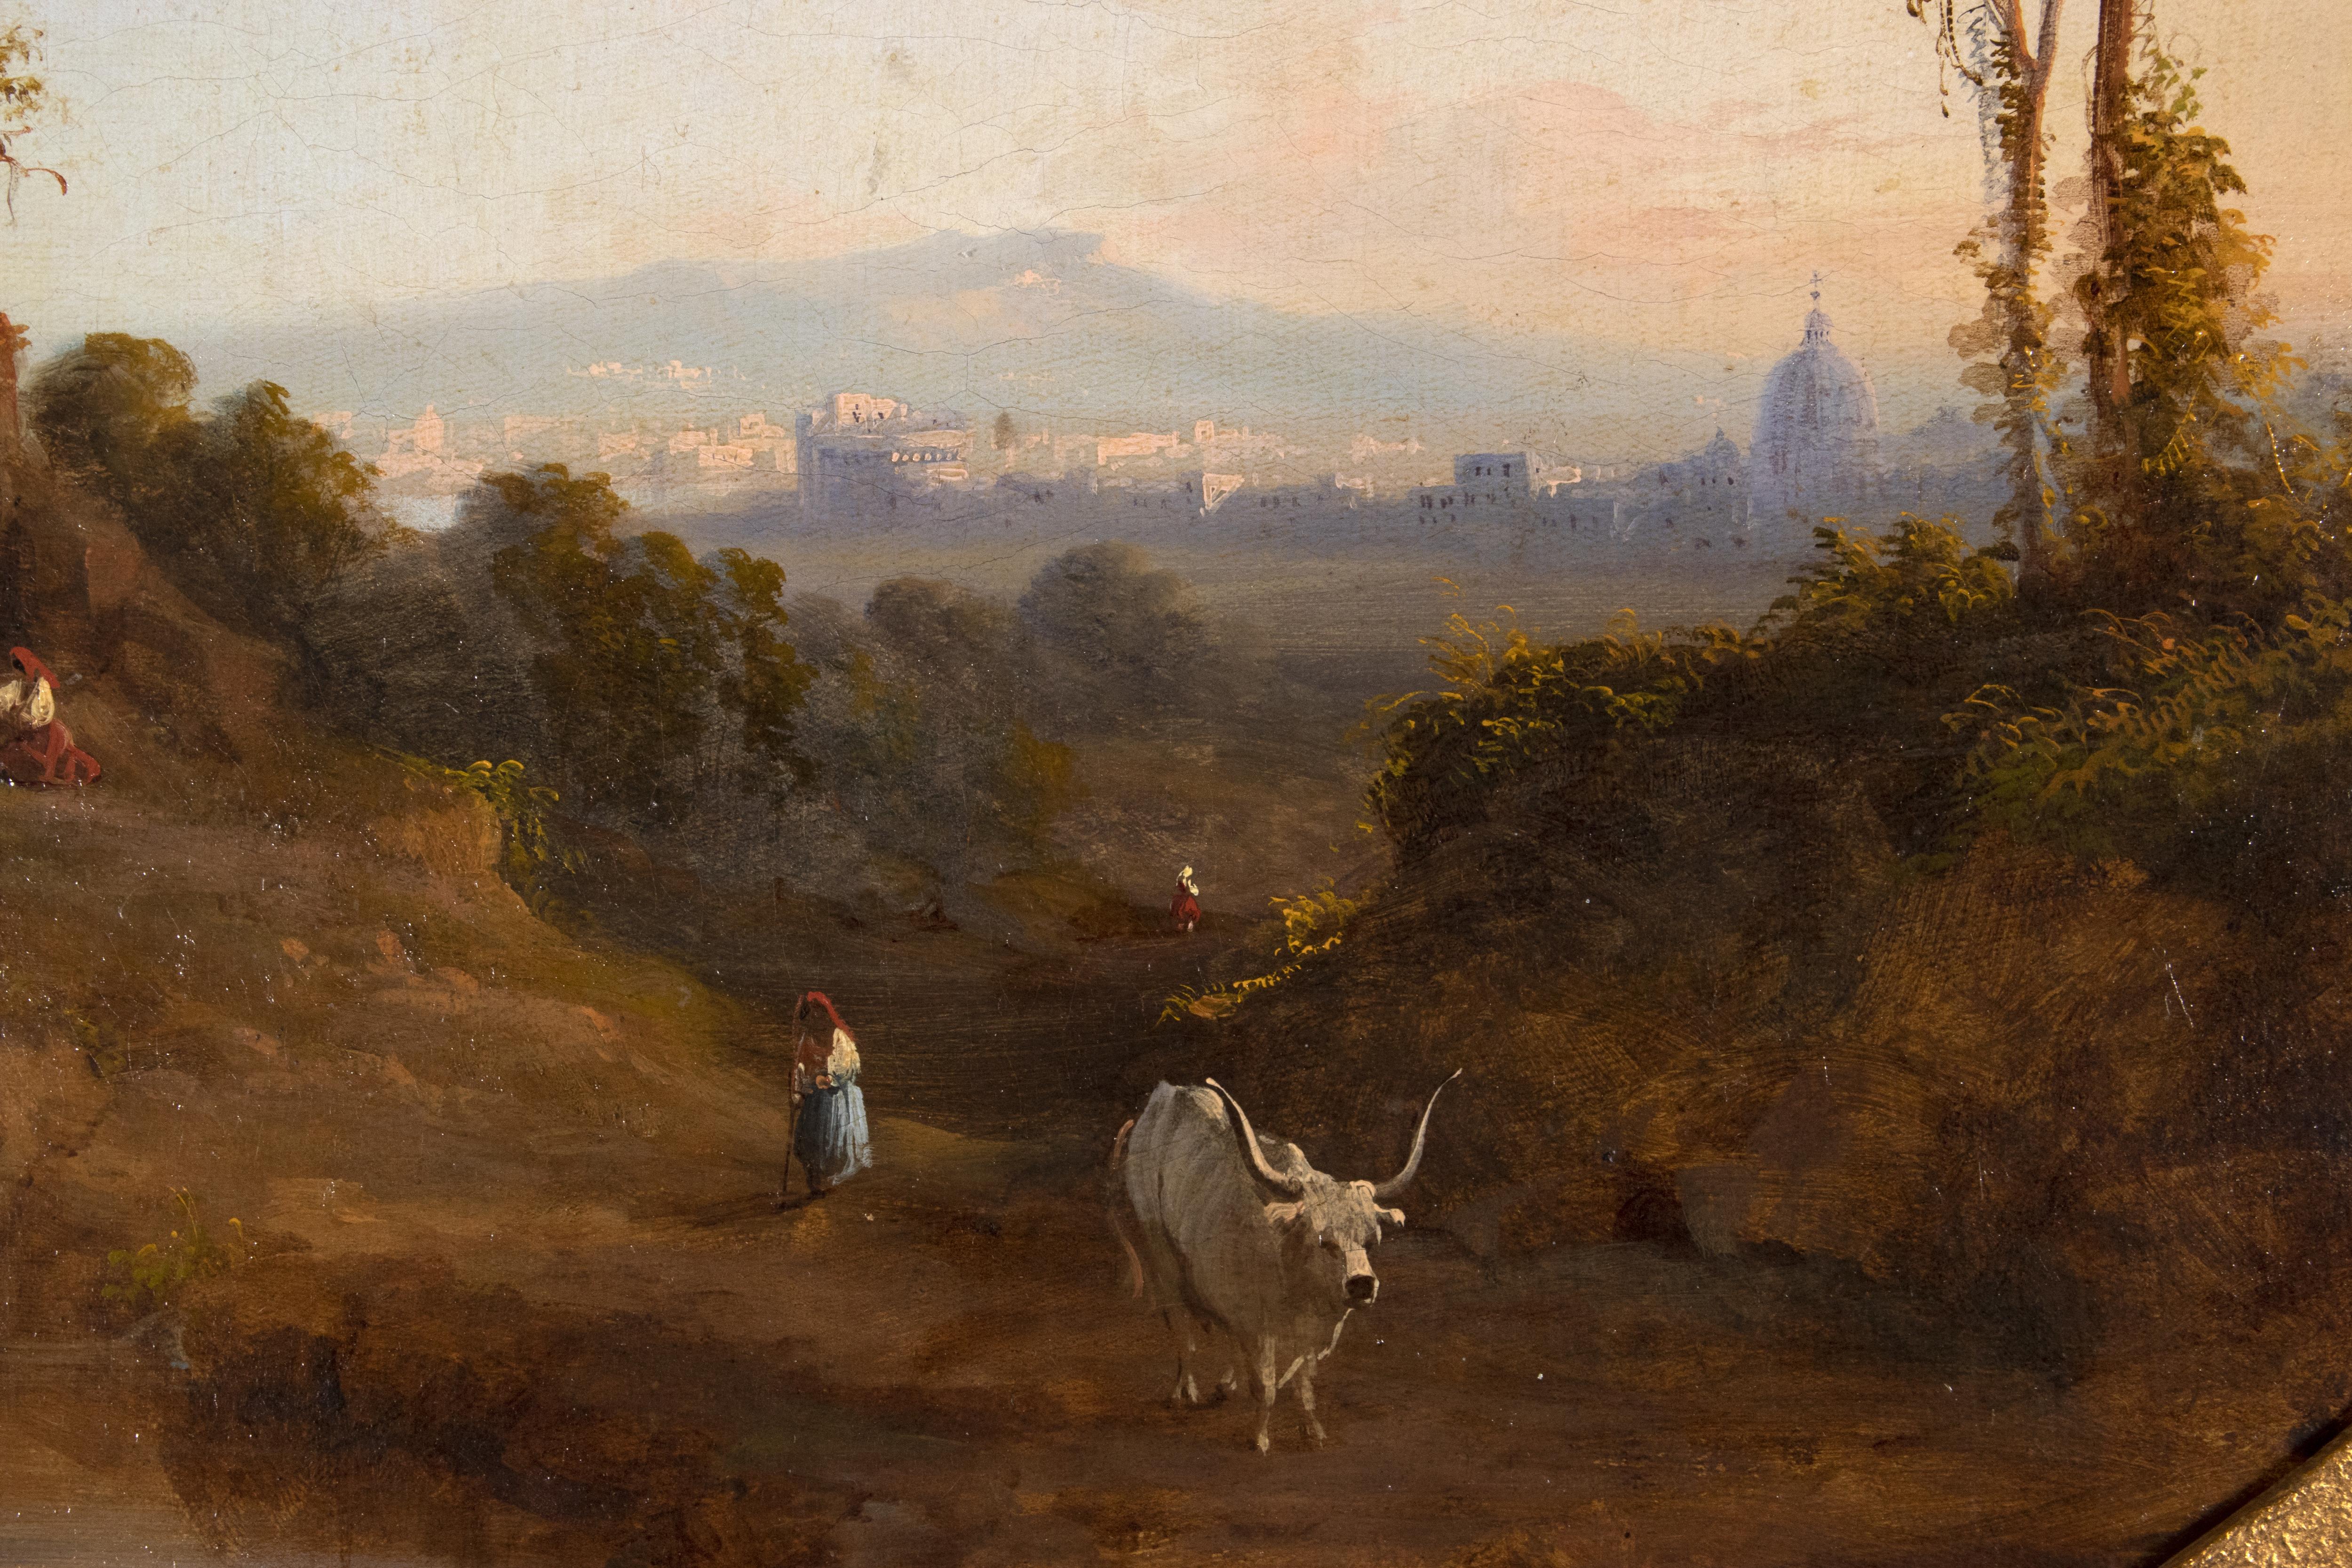 Landscapes with Views of Ancient Rome is an original pair of oil on canvas realized in the Second Half 19th Century.

Mixed colored oil on canvas, mounted on panel.

Minor damage to frame (54 x 64.5 cm)

The paintings  depict the roman countryside,